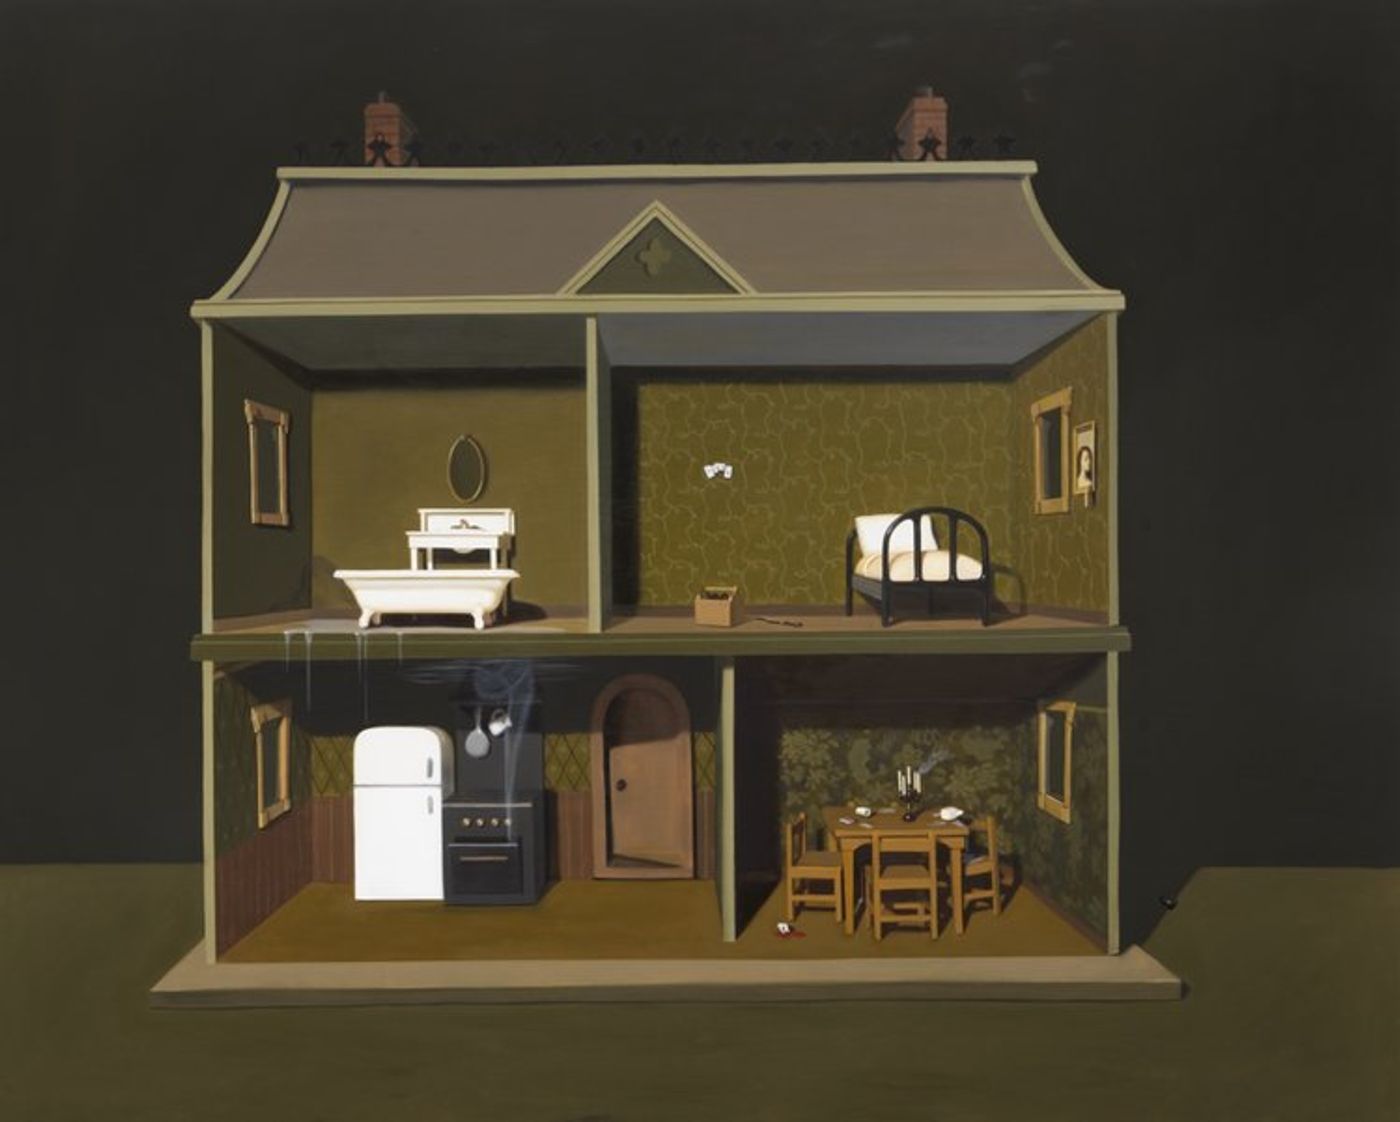 Image of Anatomy of Small House, 2019: Oil on panel